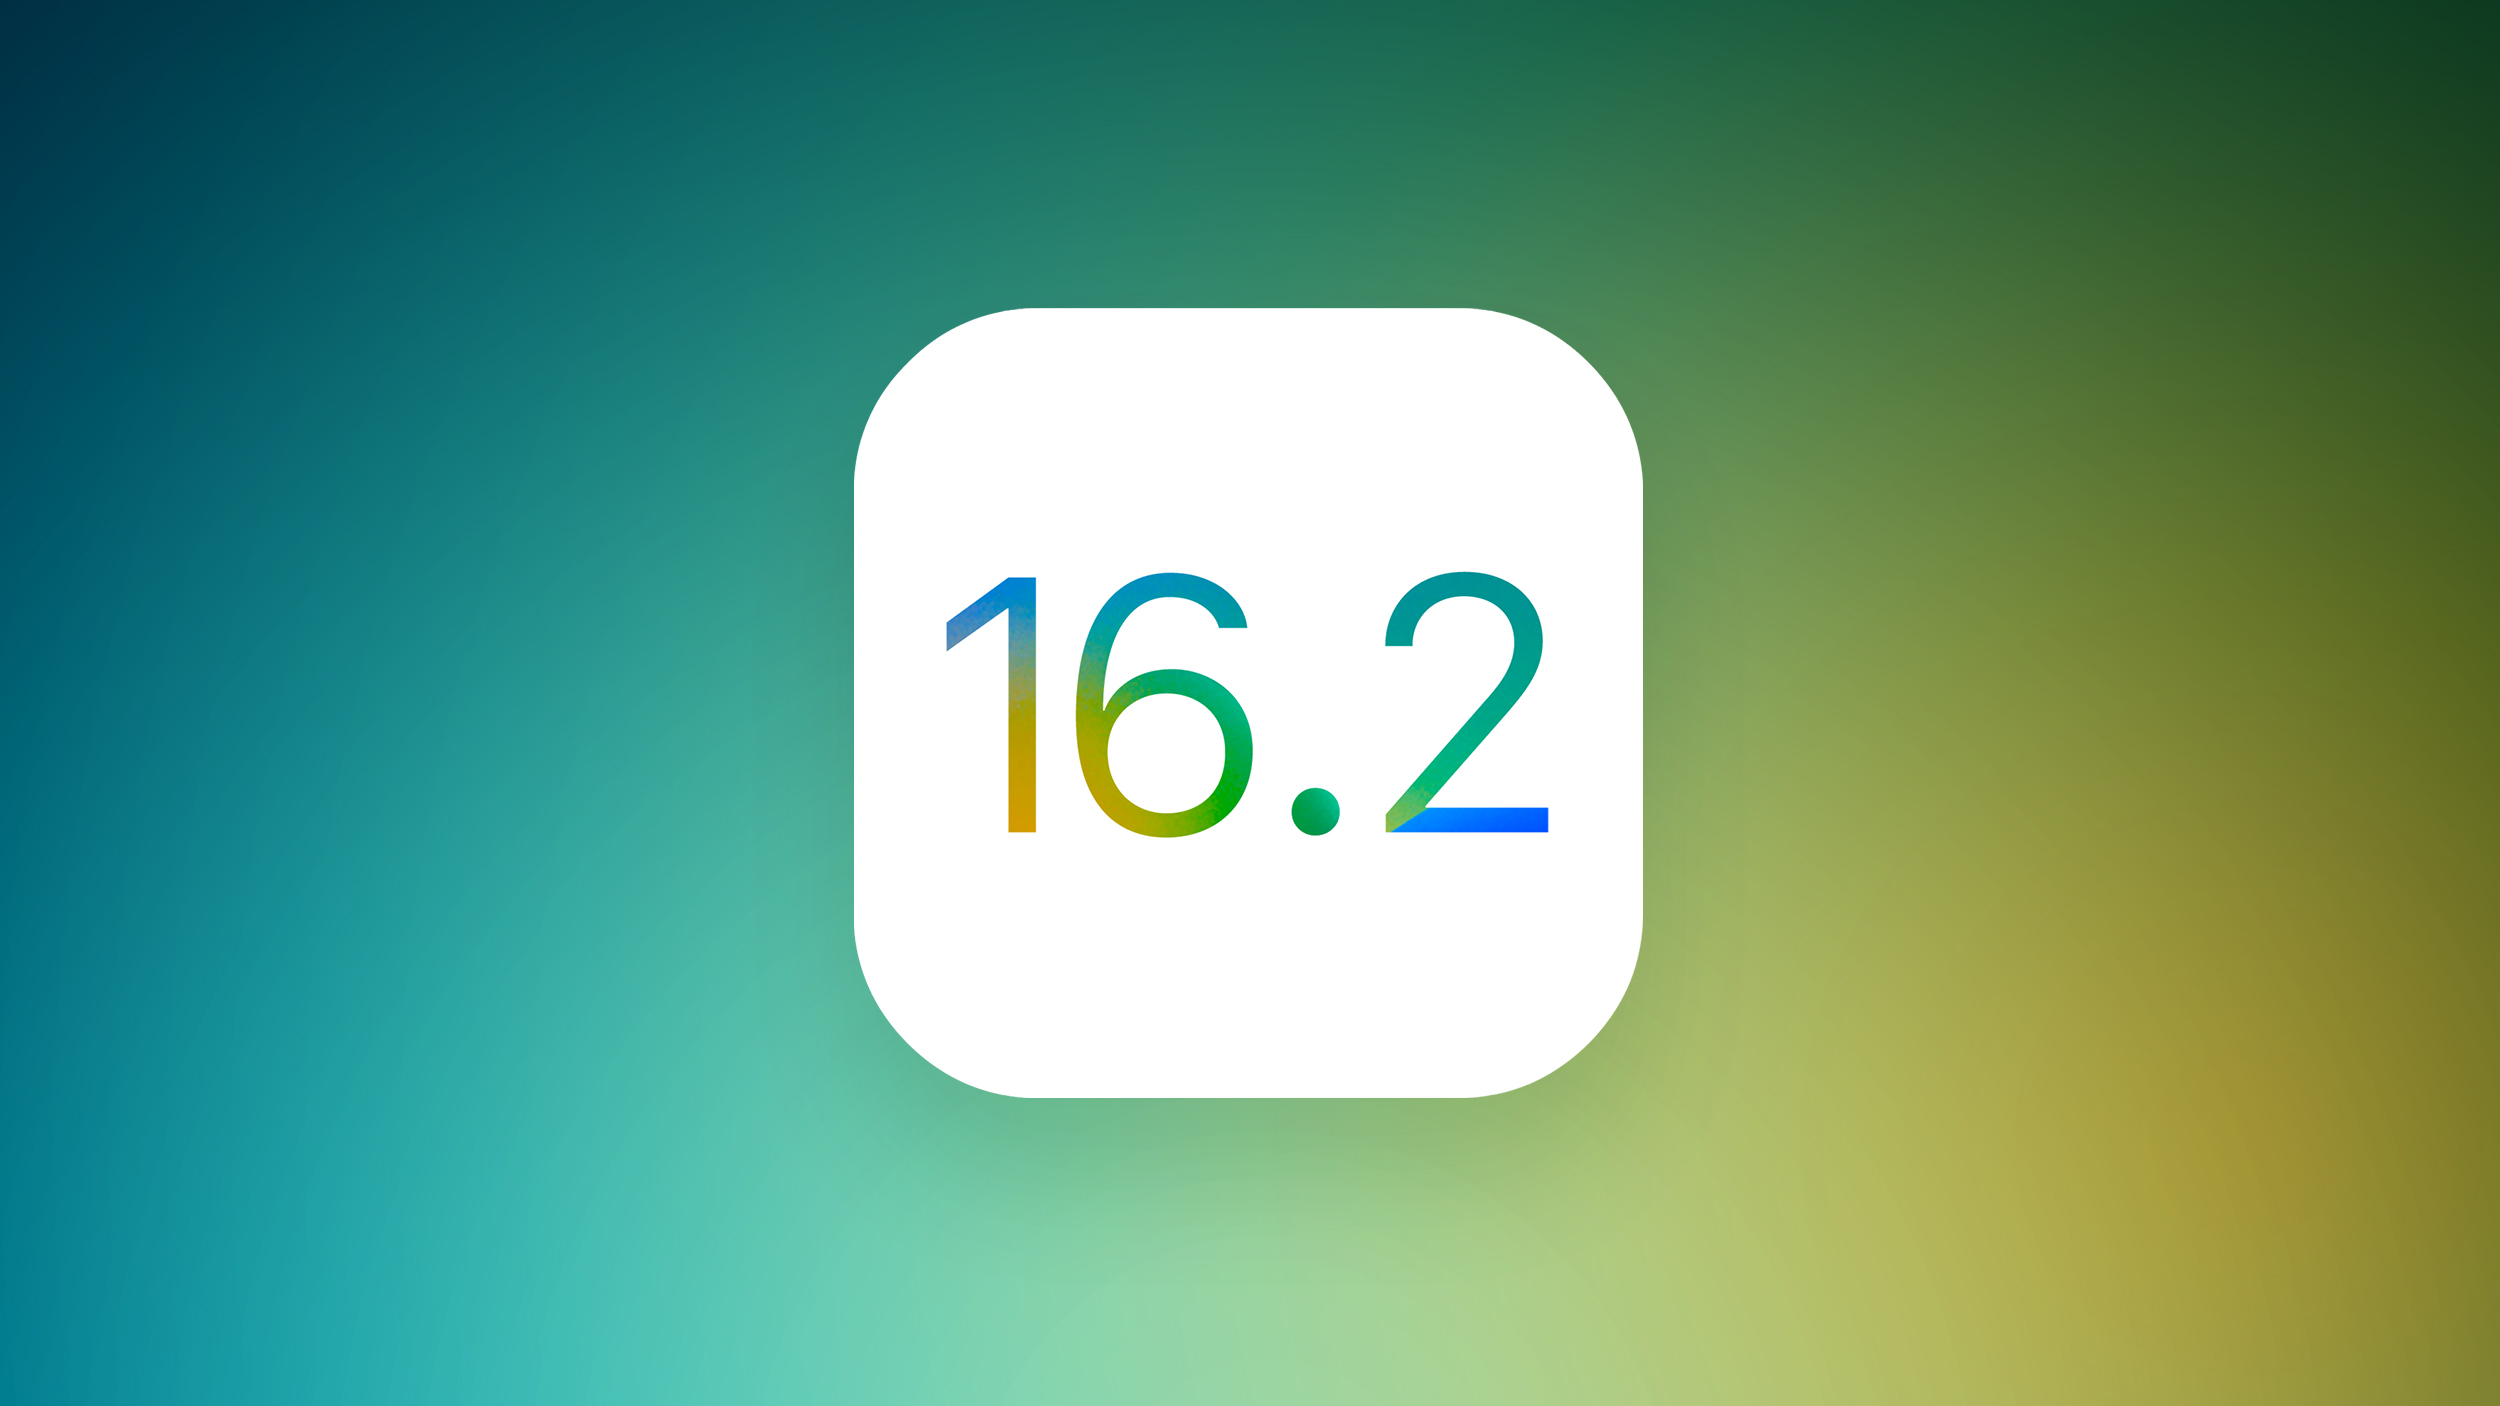 Apple Releases First Betas of iOS 16.2 and iPadOS 16.2 to Developers